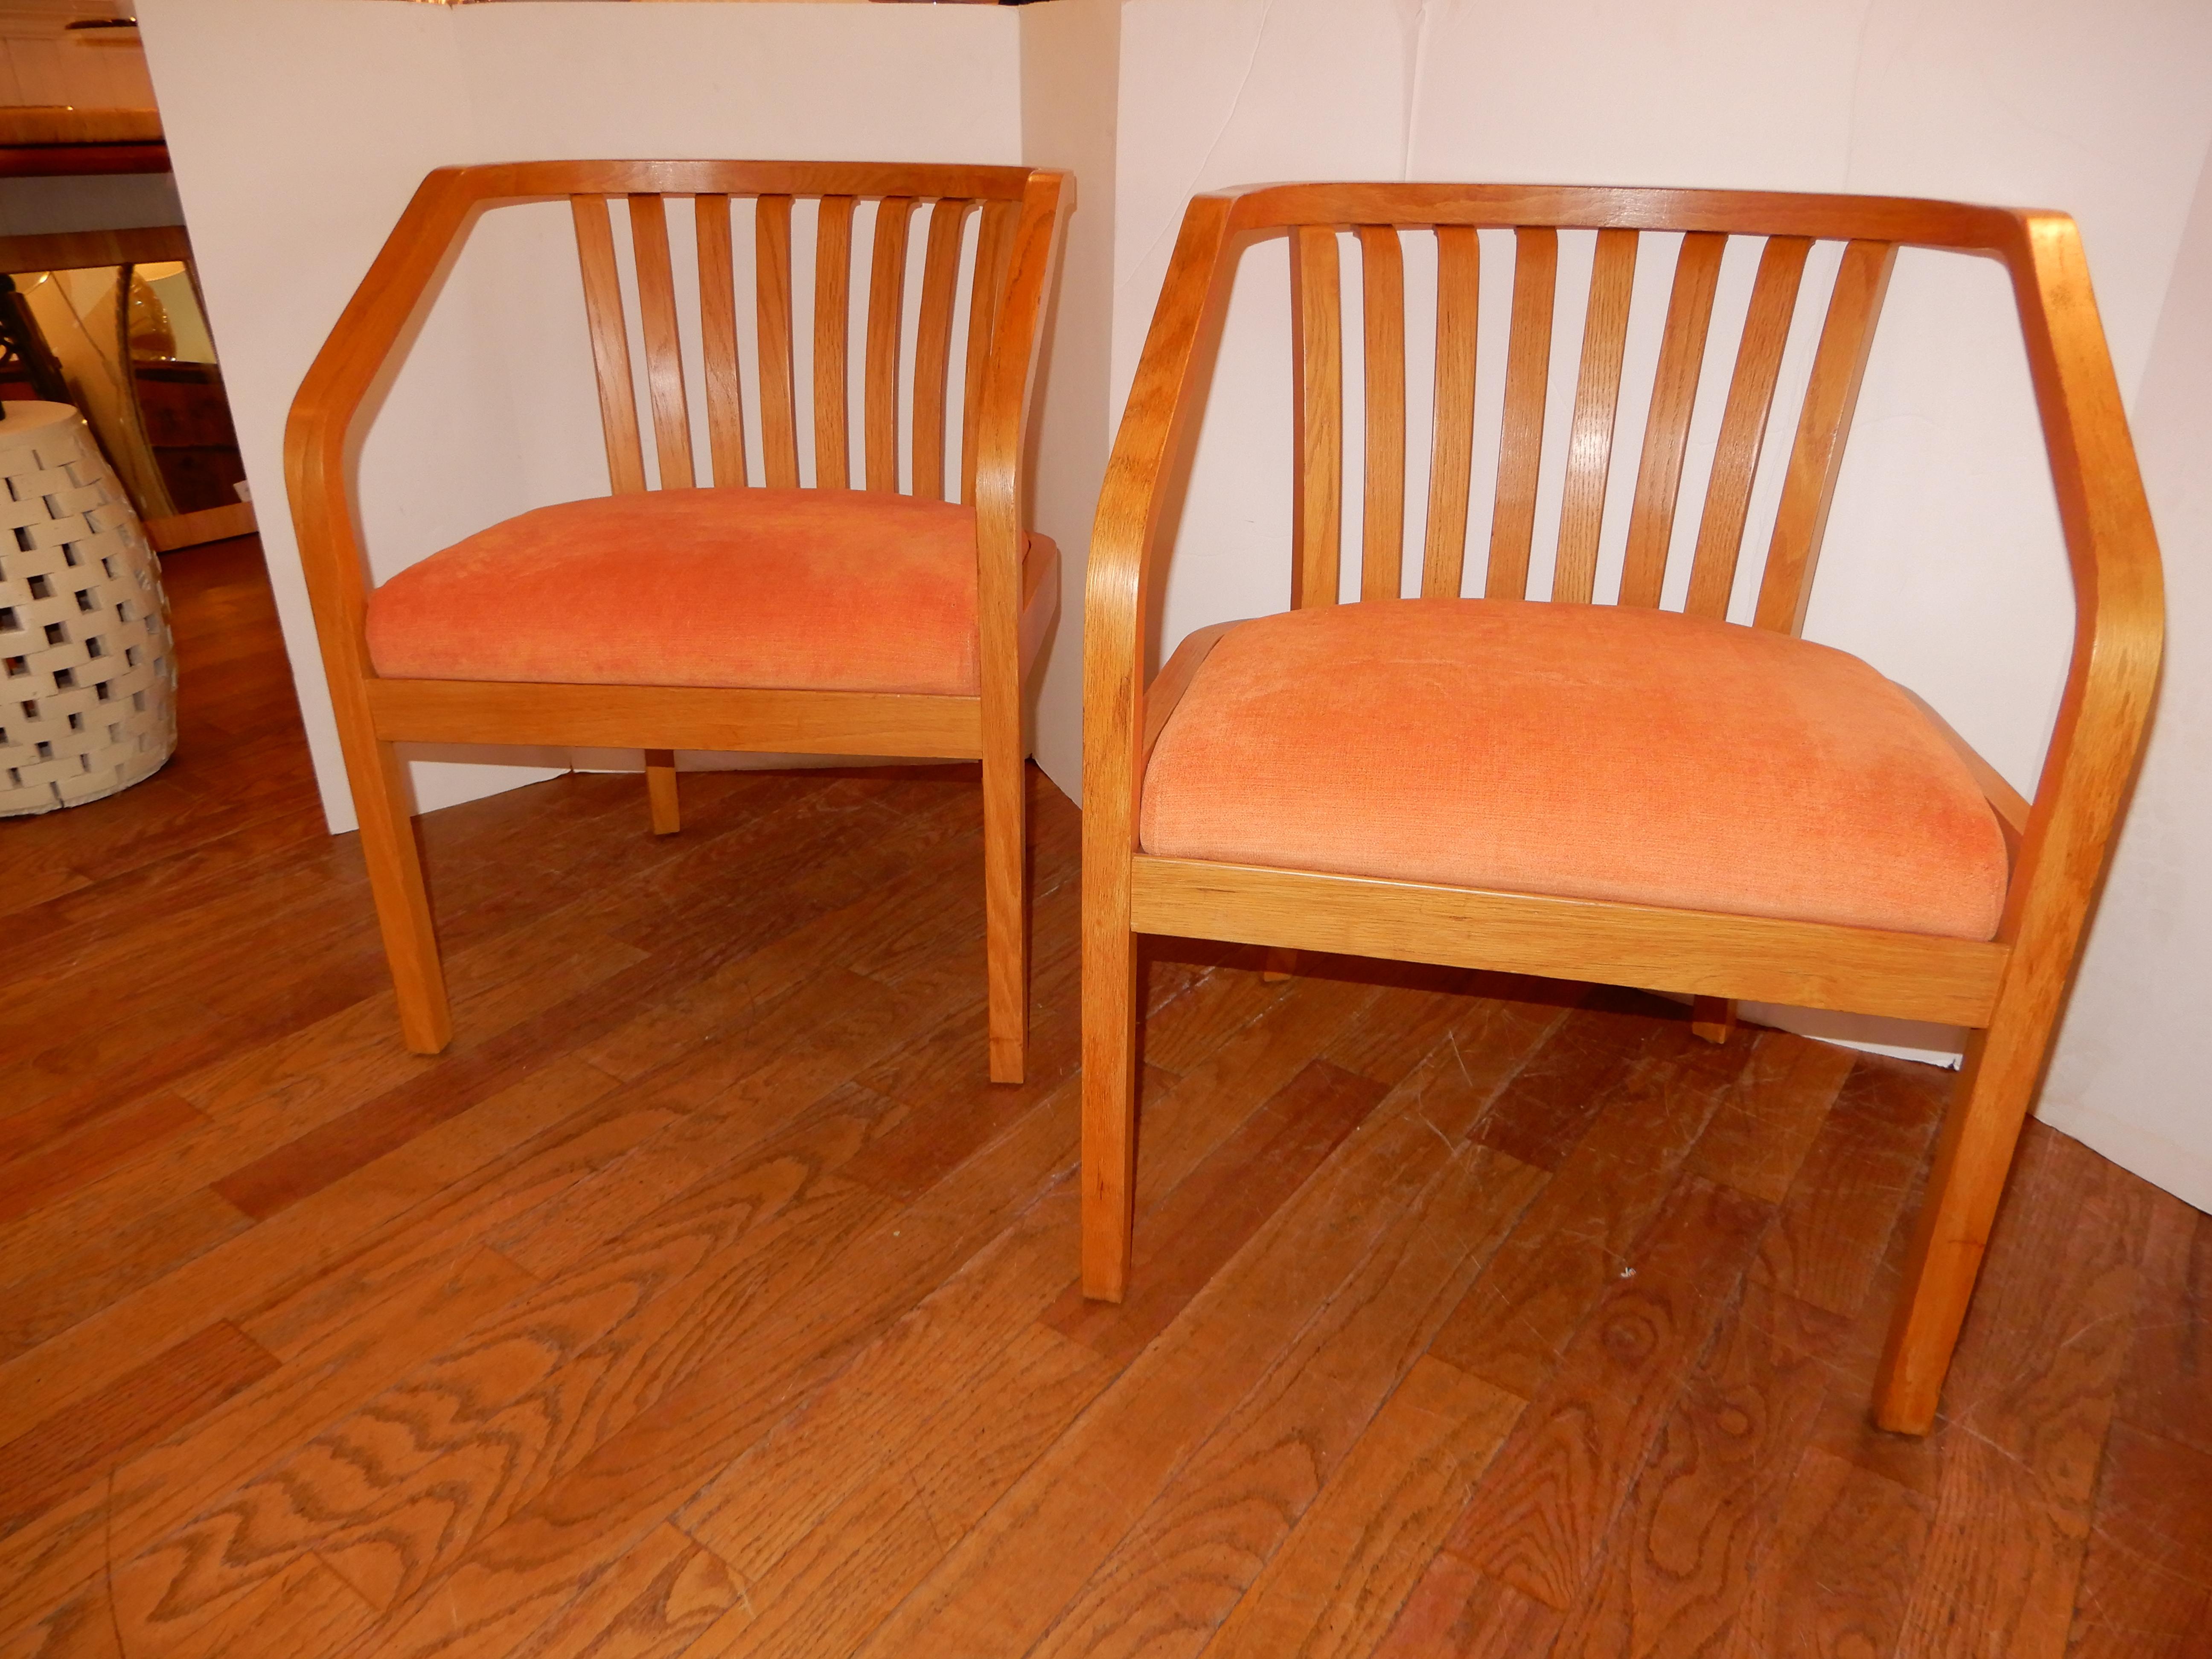 There are four chairs available and sold in sets of two,all new upholstery in a soft chenille fabric,immaculate condition. Generous deep seat,light oak wood curvaceous frames. Danish modern circa 1970s.All hand crafted.